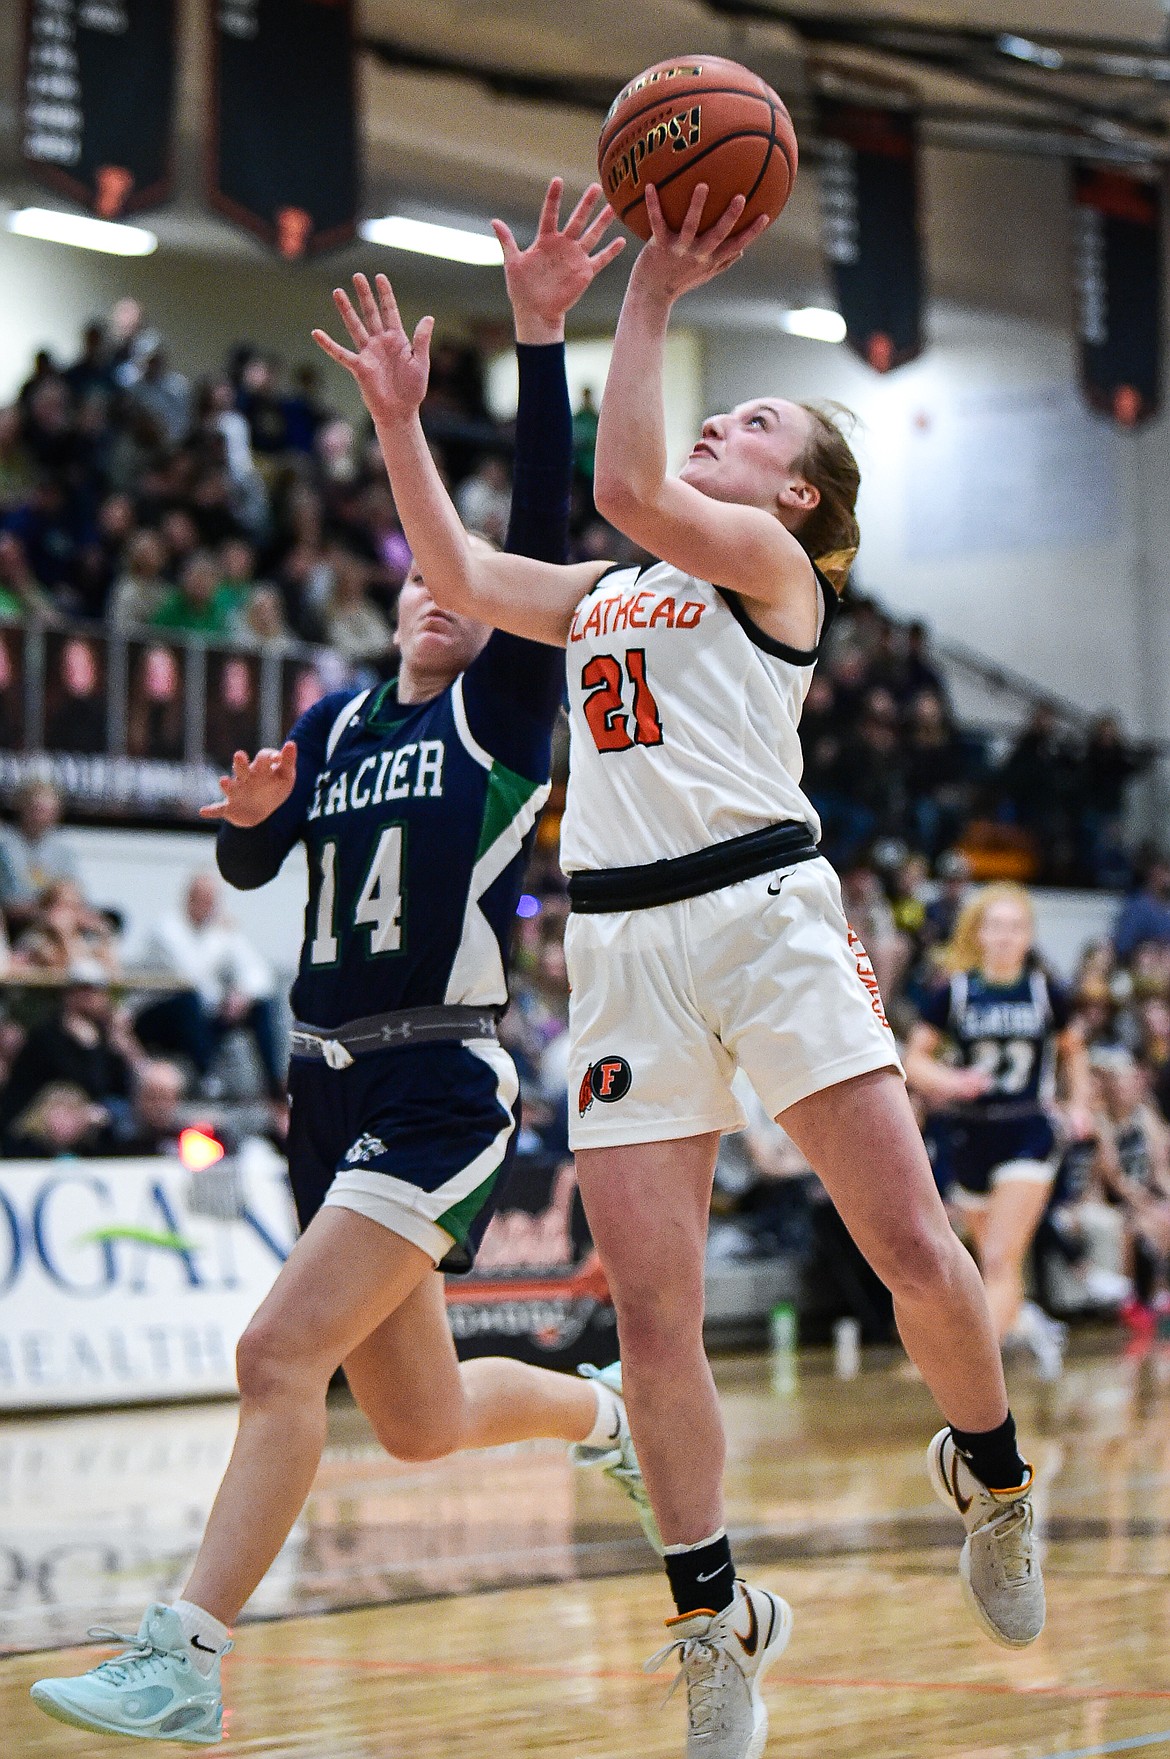 Flathead's Harlie Roth (21) drives to the basket guarded by Glacier's Karley Allen (14) at Flathead High School on Friday, Jan. 19. (Casey Kreider/Daily Inter Lake)